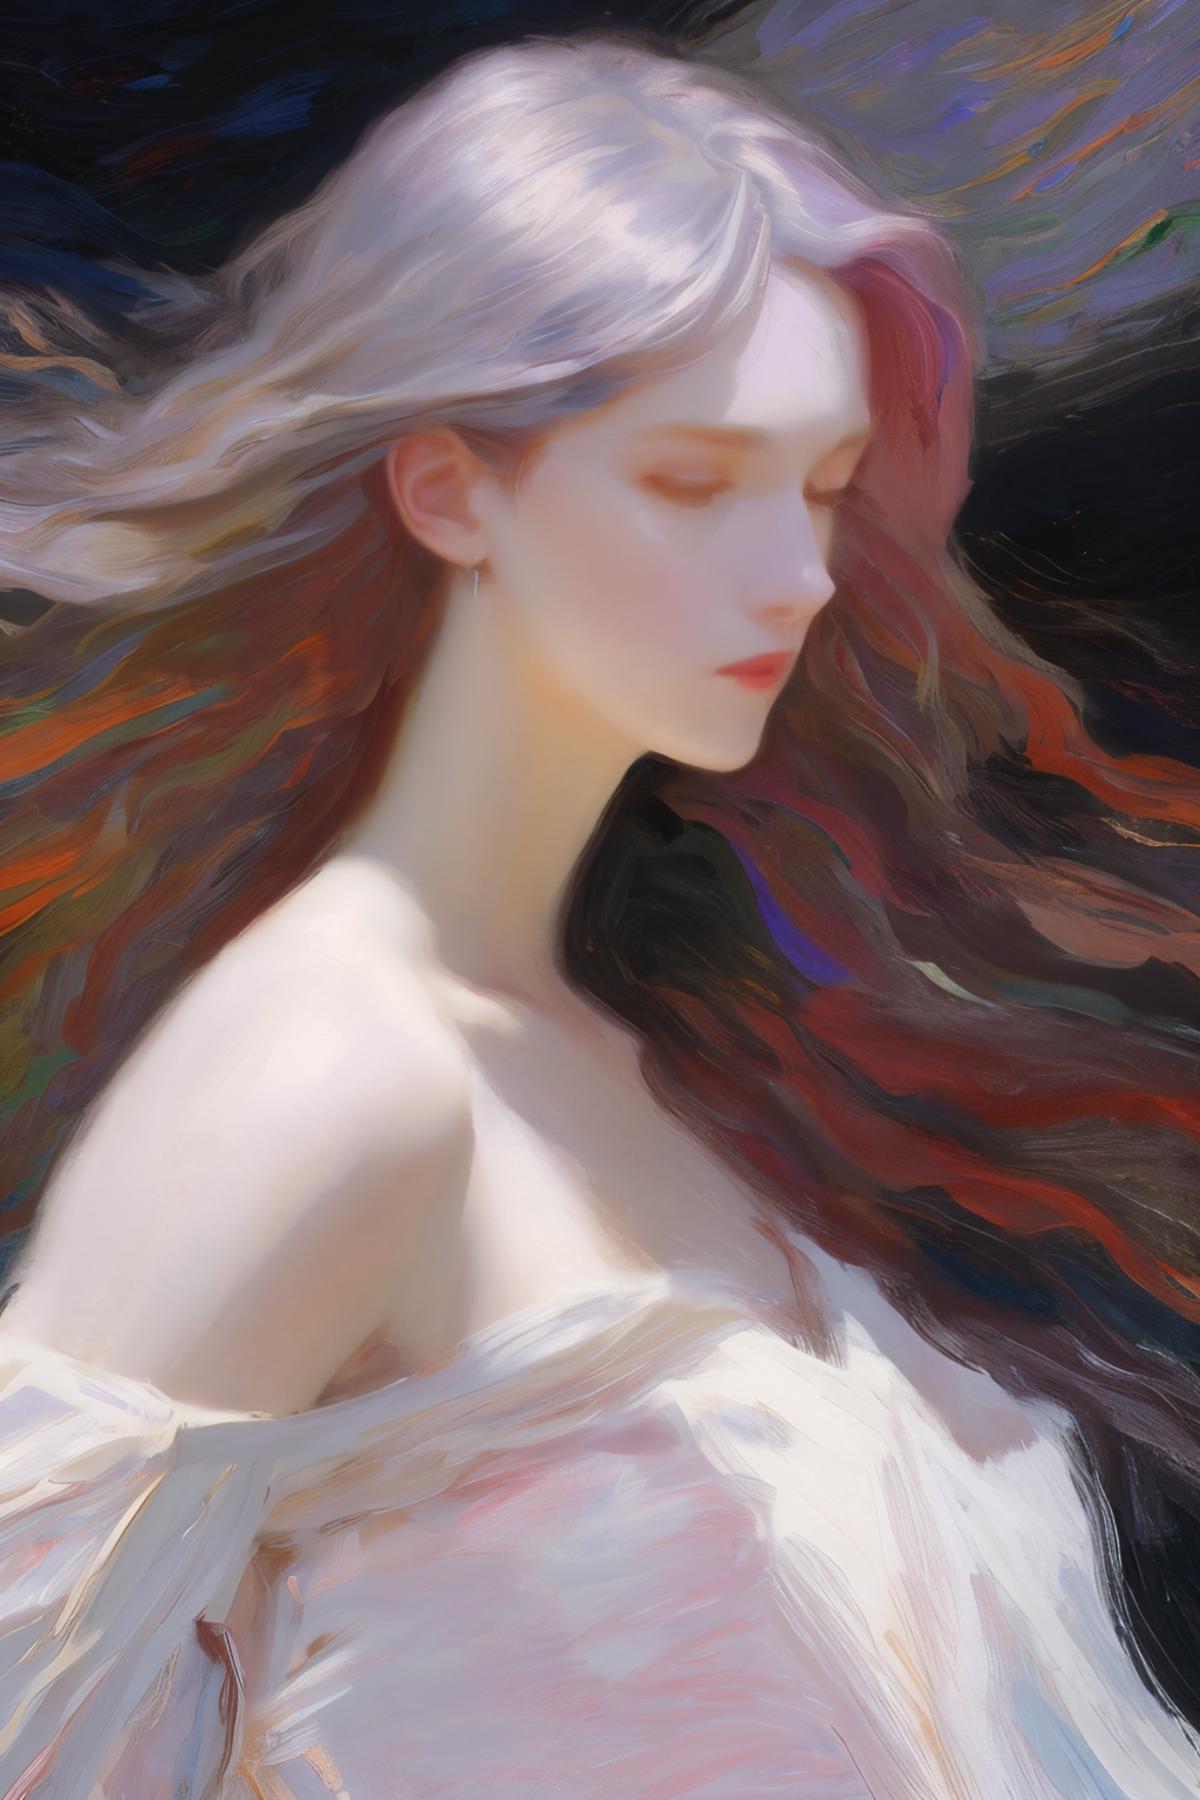 An artistic portrait of a woman with long red hair, painted in vibrant colors and featuring a close-up of her face.